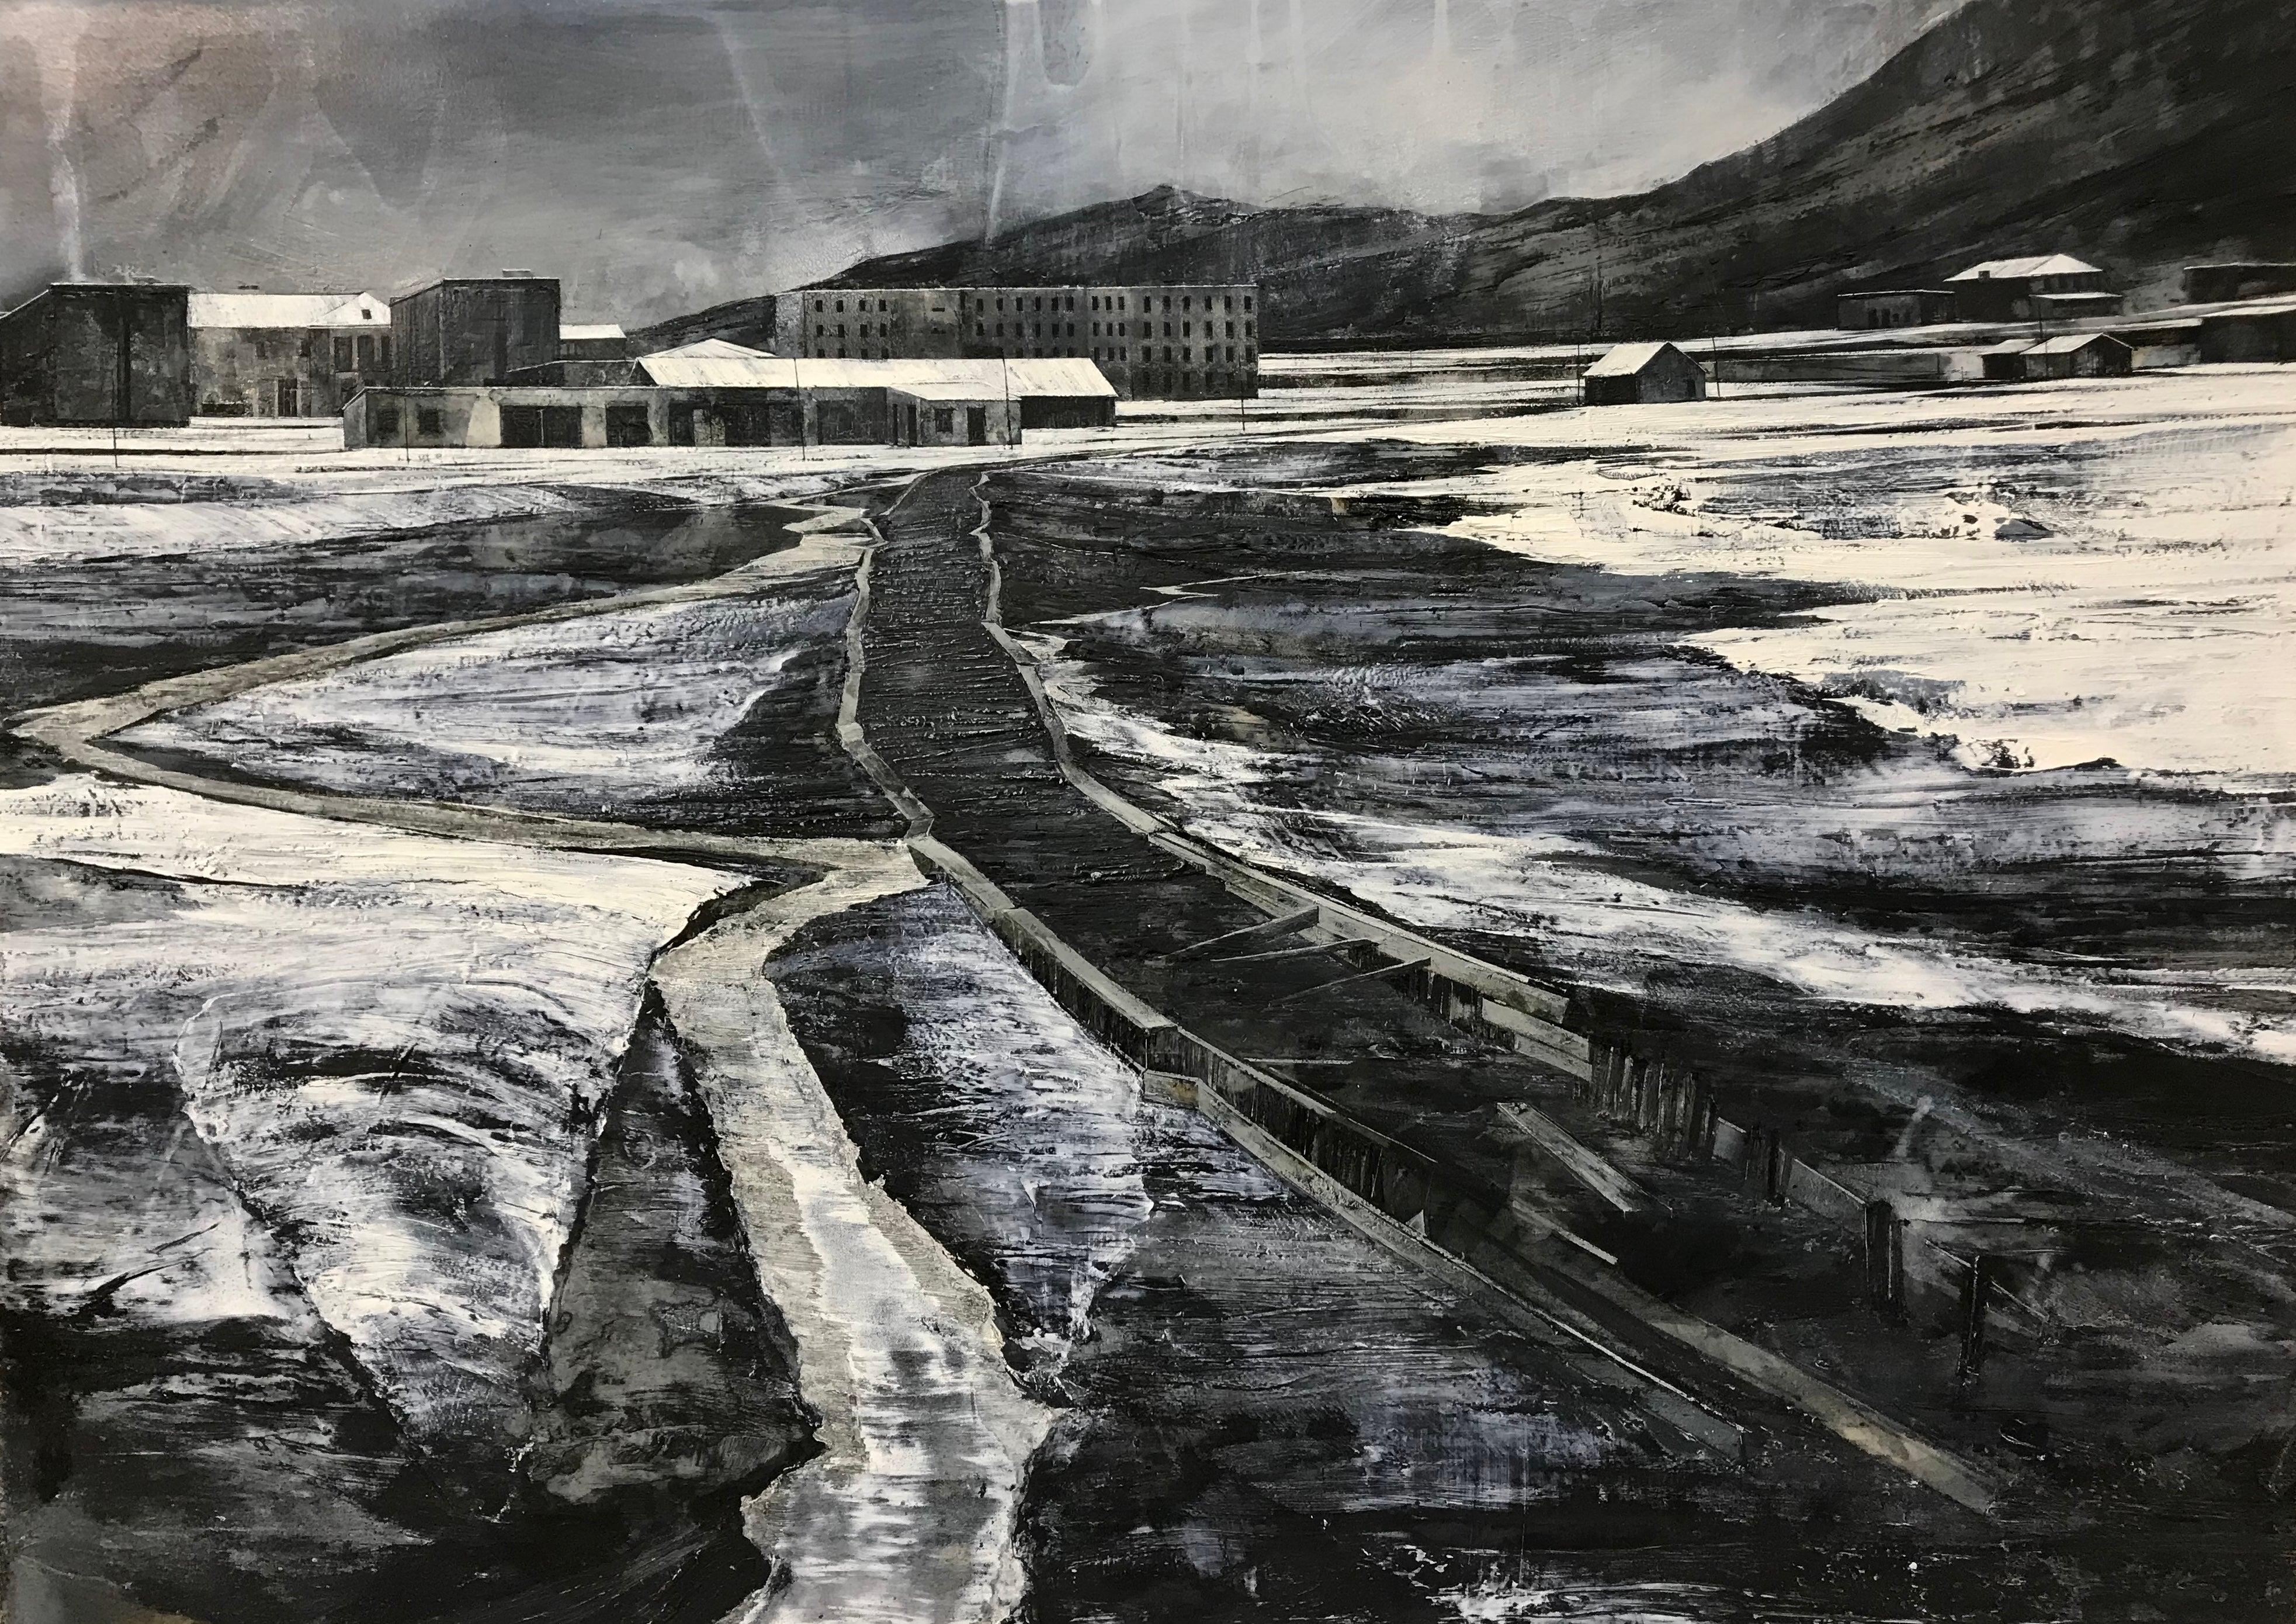 To Turn My Face Away - Atmospheric Monochromatic Black & White Abstract Landscape Painting. Mark Thompson is a seasoned professional painter with international representation in Sweden, Germany & the USA. We are proud to represent Mark here in the